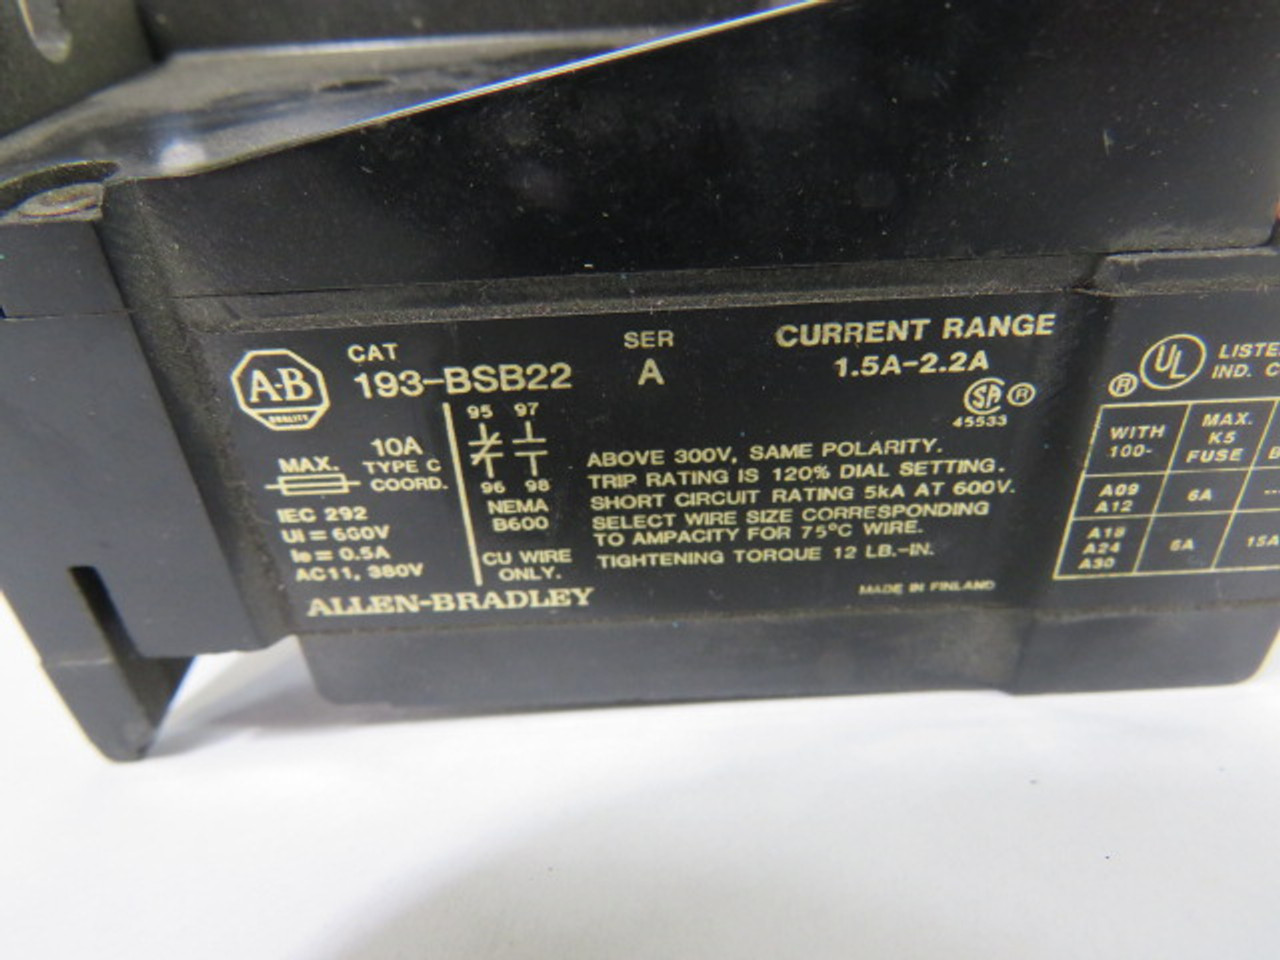 Allen-Bradley 193-BSB22 Series A Overload Relay 1.5-2.2A USED